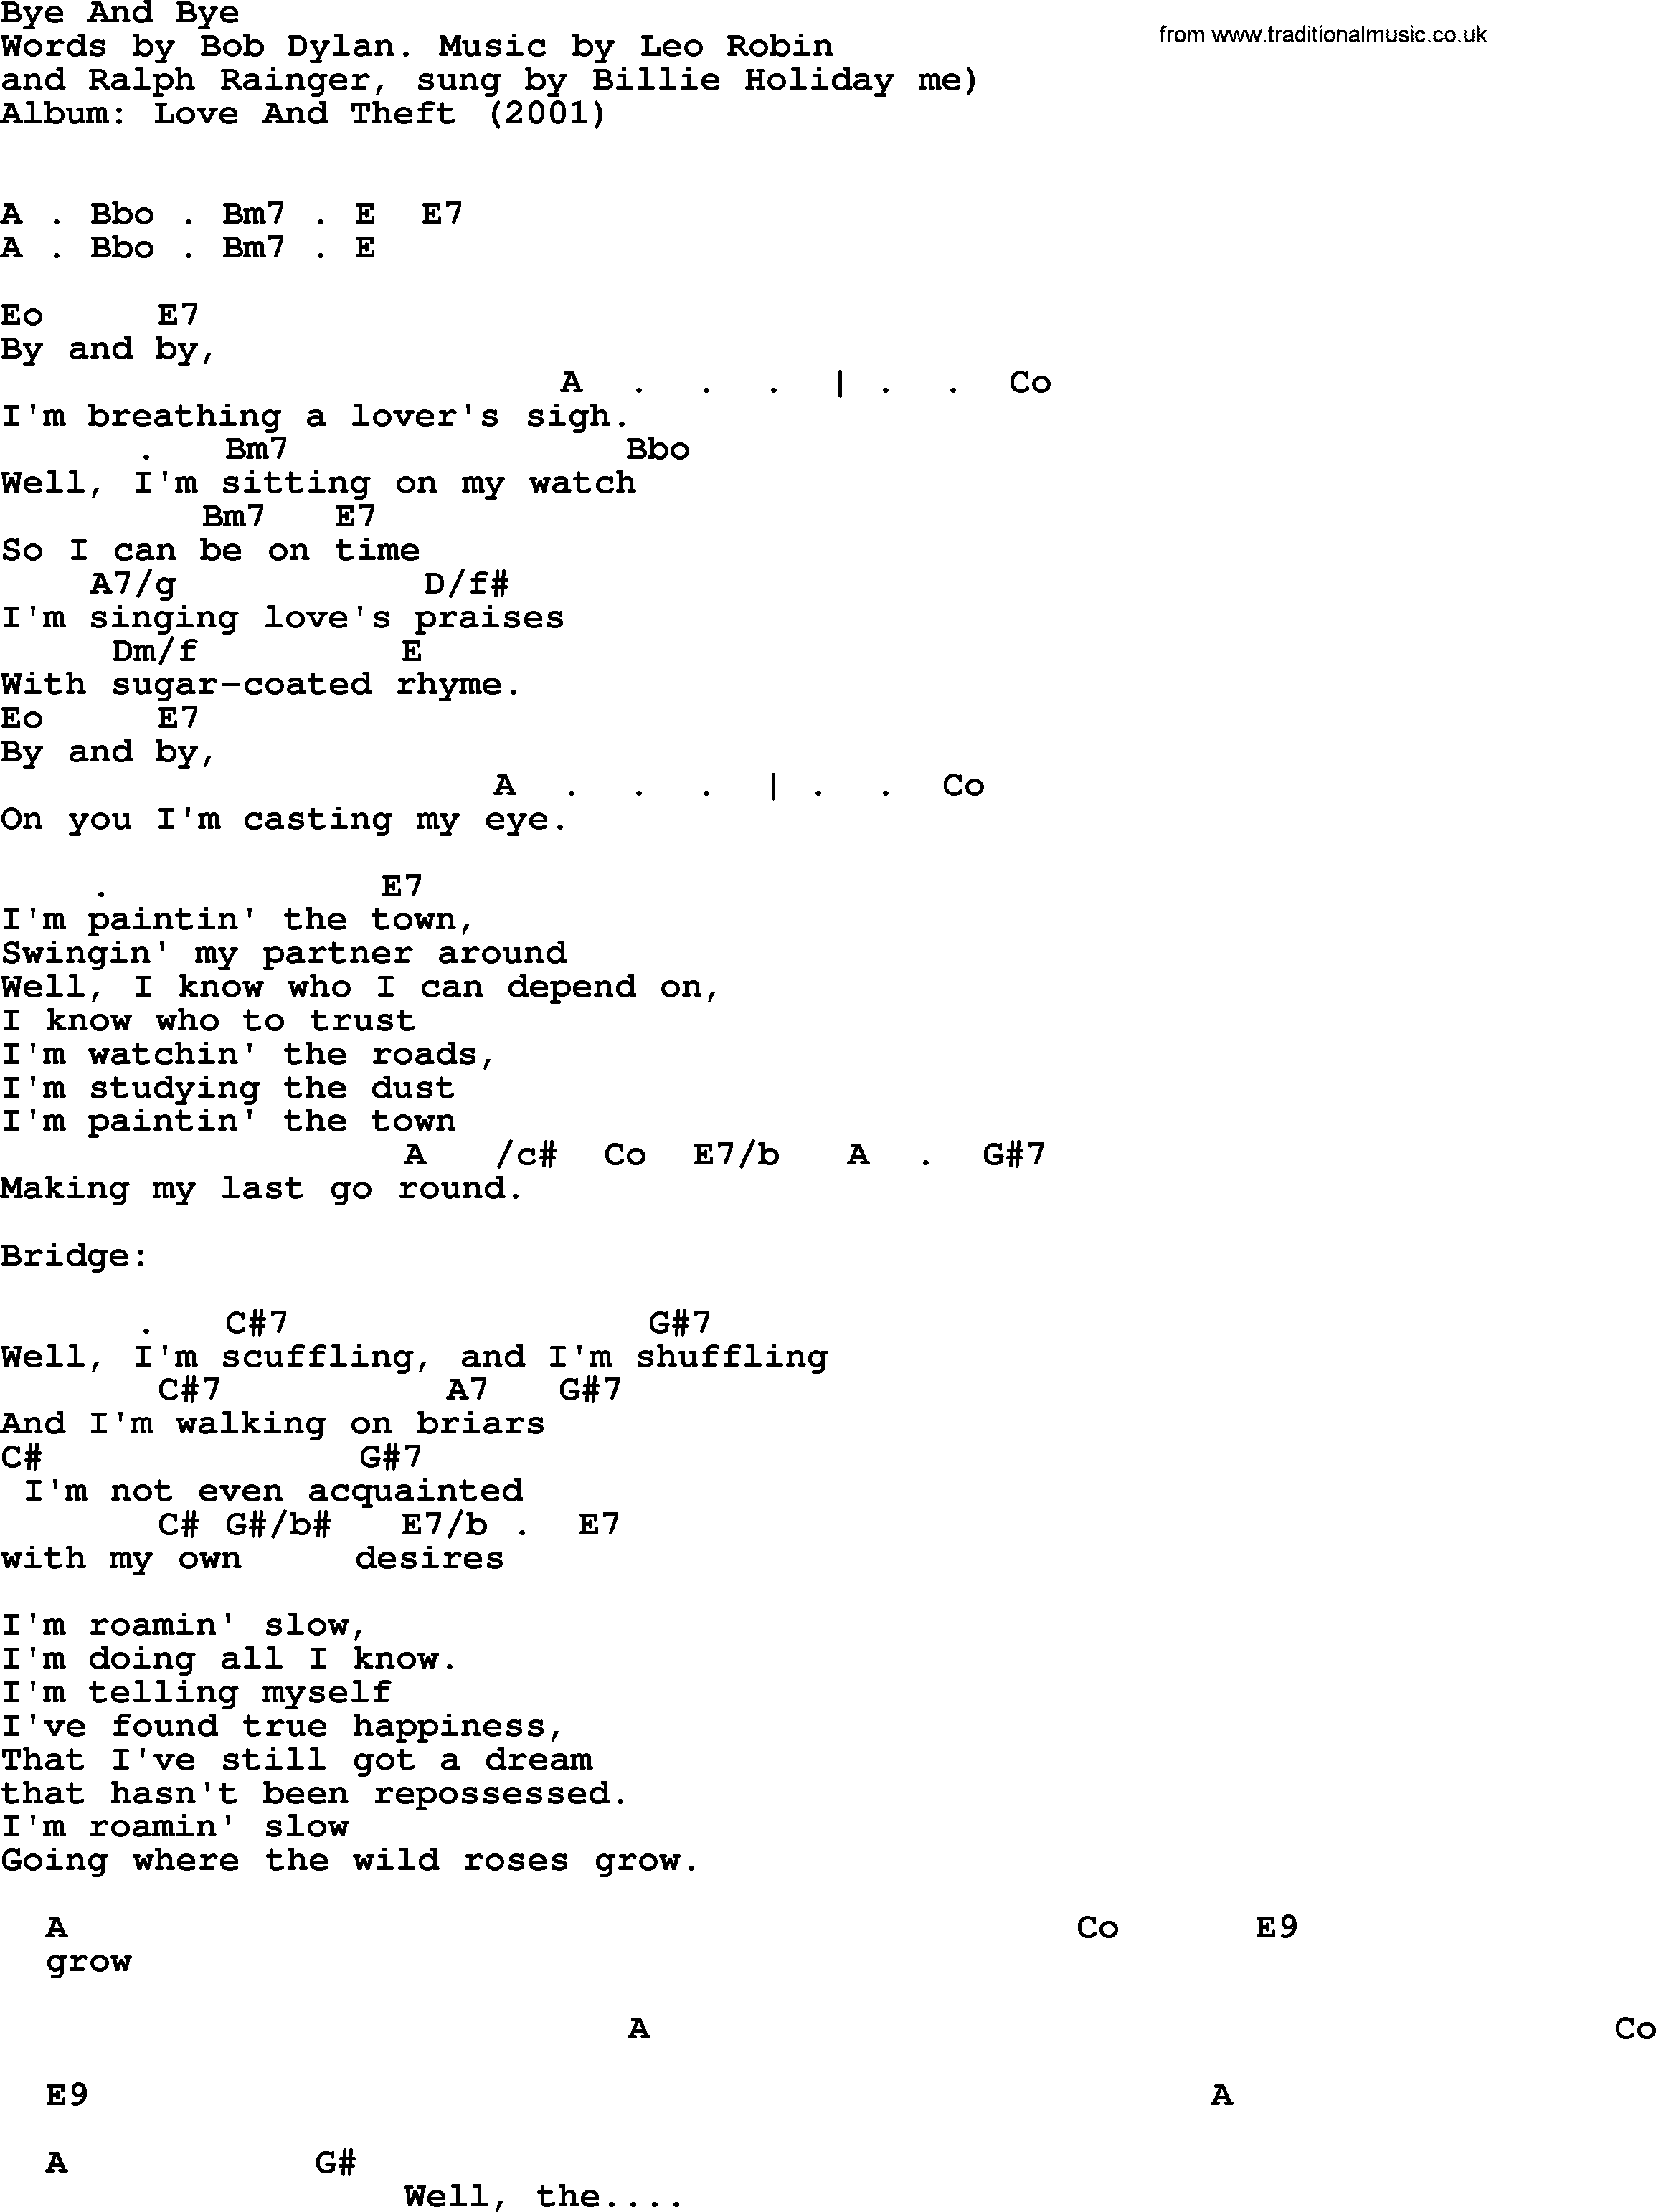 Bob Dylan song, lyrics with chords - Bye And Bye